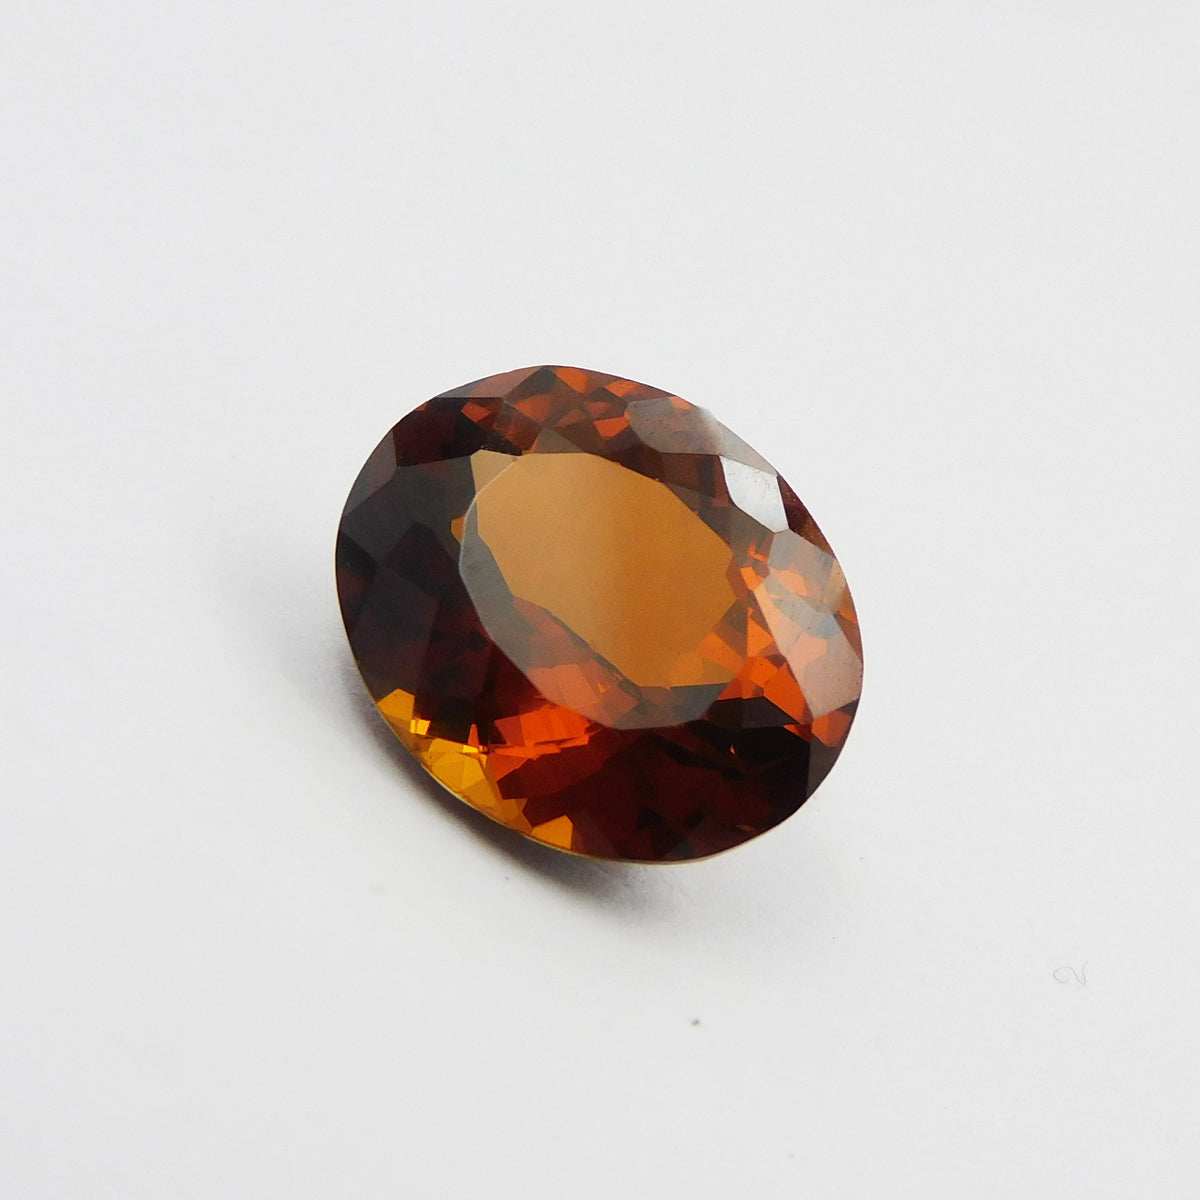 ON DEMAND !! Sapphire Necklace Natural Certified Oval Cut 9.37 Carat Orange Color Ceylon Sapphire Gemstone | For Sapphire Stone | Best Price